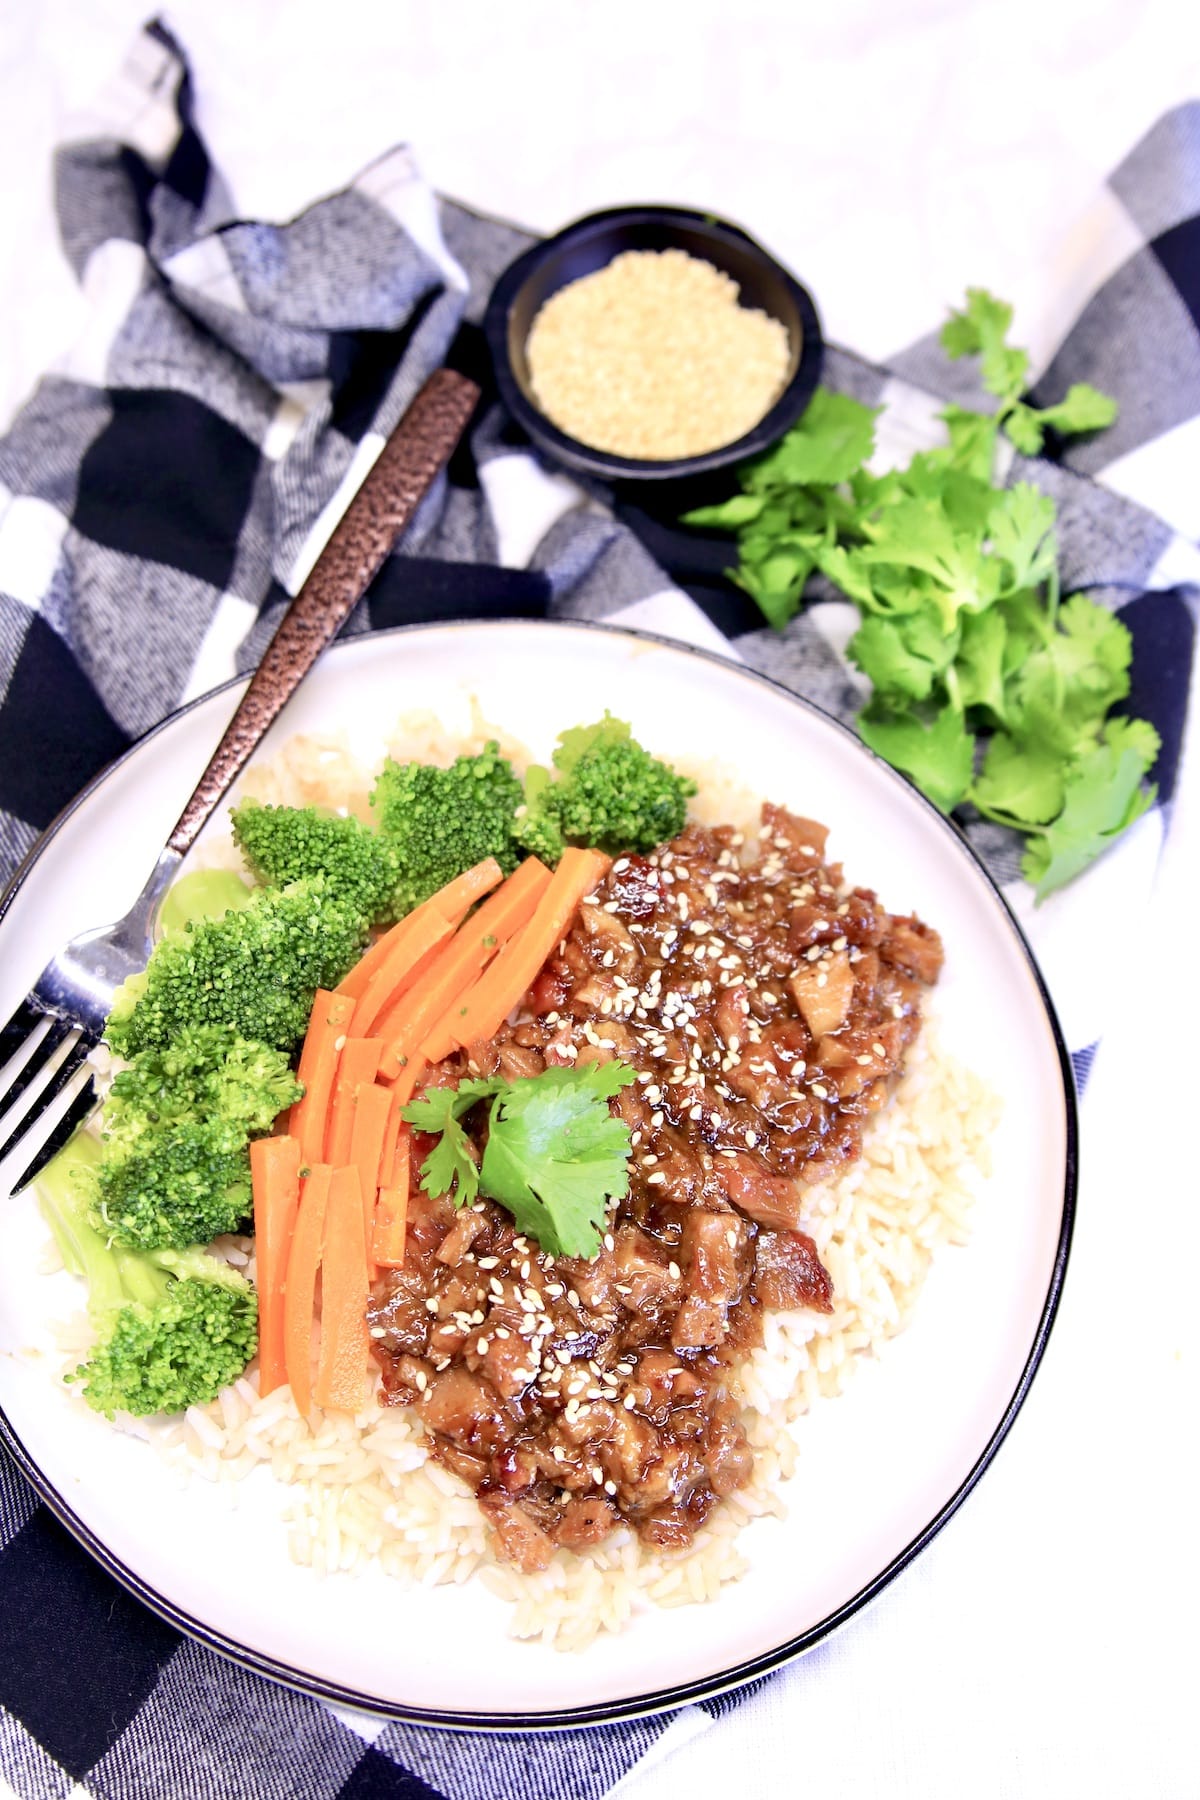 Plate of Mongolian pork with carrots and broccoli over rice.